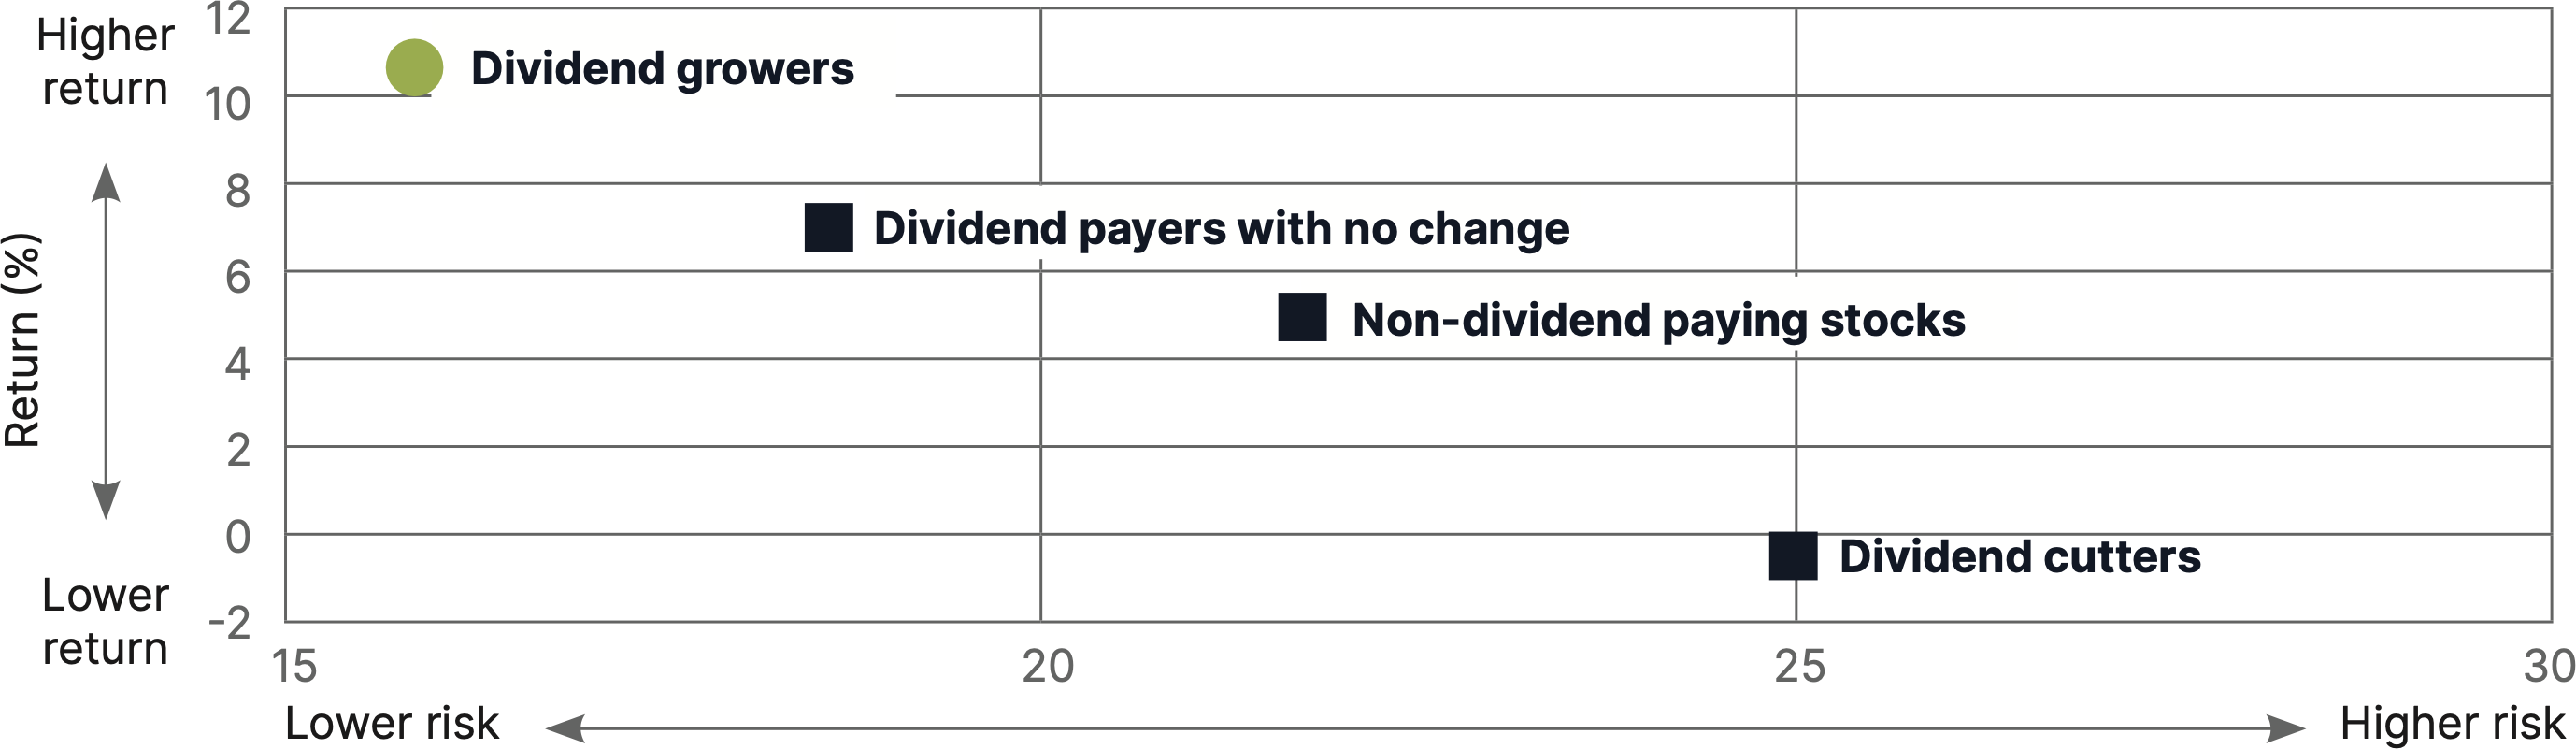 Risk-Adjusted Returns of S&P 500 Index Stocks by Dividend Policy